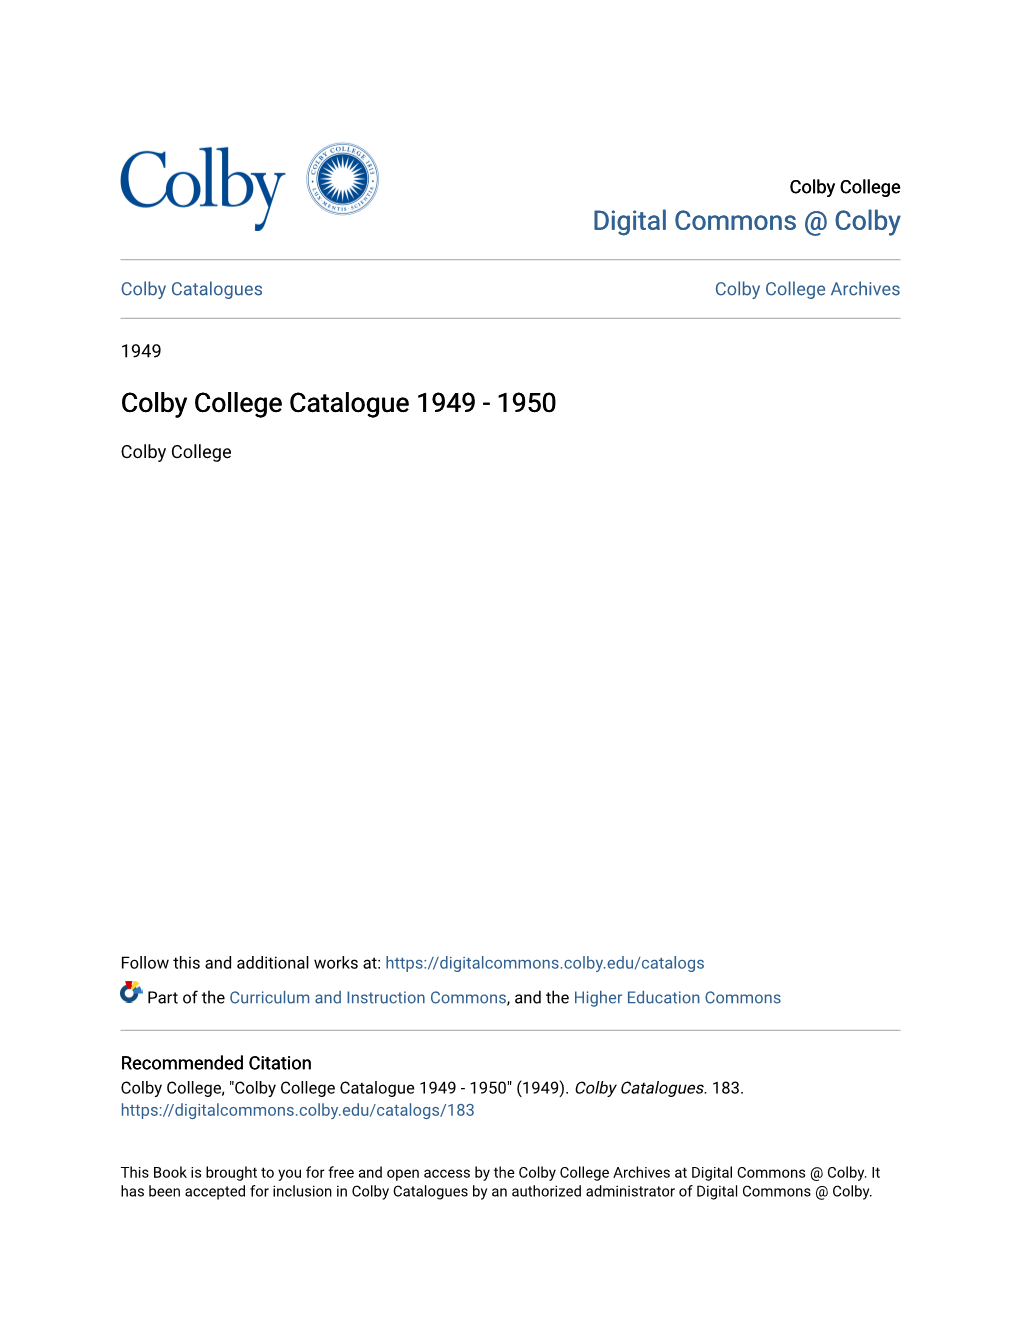 Colby College Catalogue 1949 - 1950